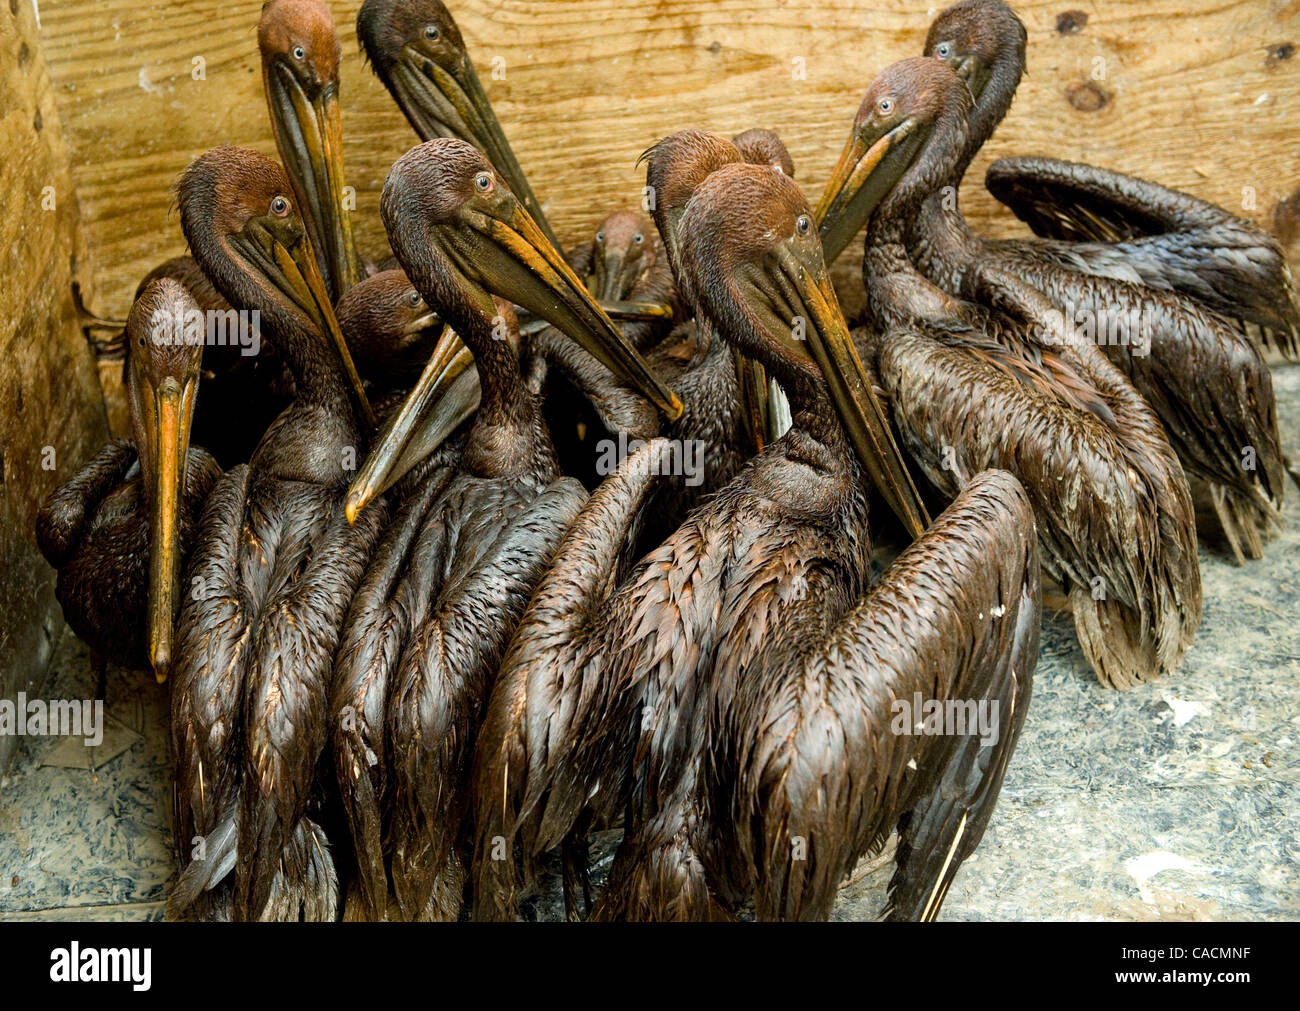 Jun. 08, 2010 - Buras, Louisiana, US - Oil stained brown pelicans wait in a holding box to be cleaned at an animal rescue facility in Fort Jackson.  Oil from the Deepwater Horizon oil spill continues to wash a shore along the Gulf of Mexico all the way to Florida.  Over the past six weeks the rescue Stock Photo